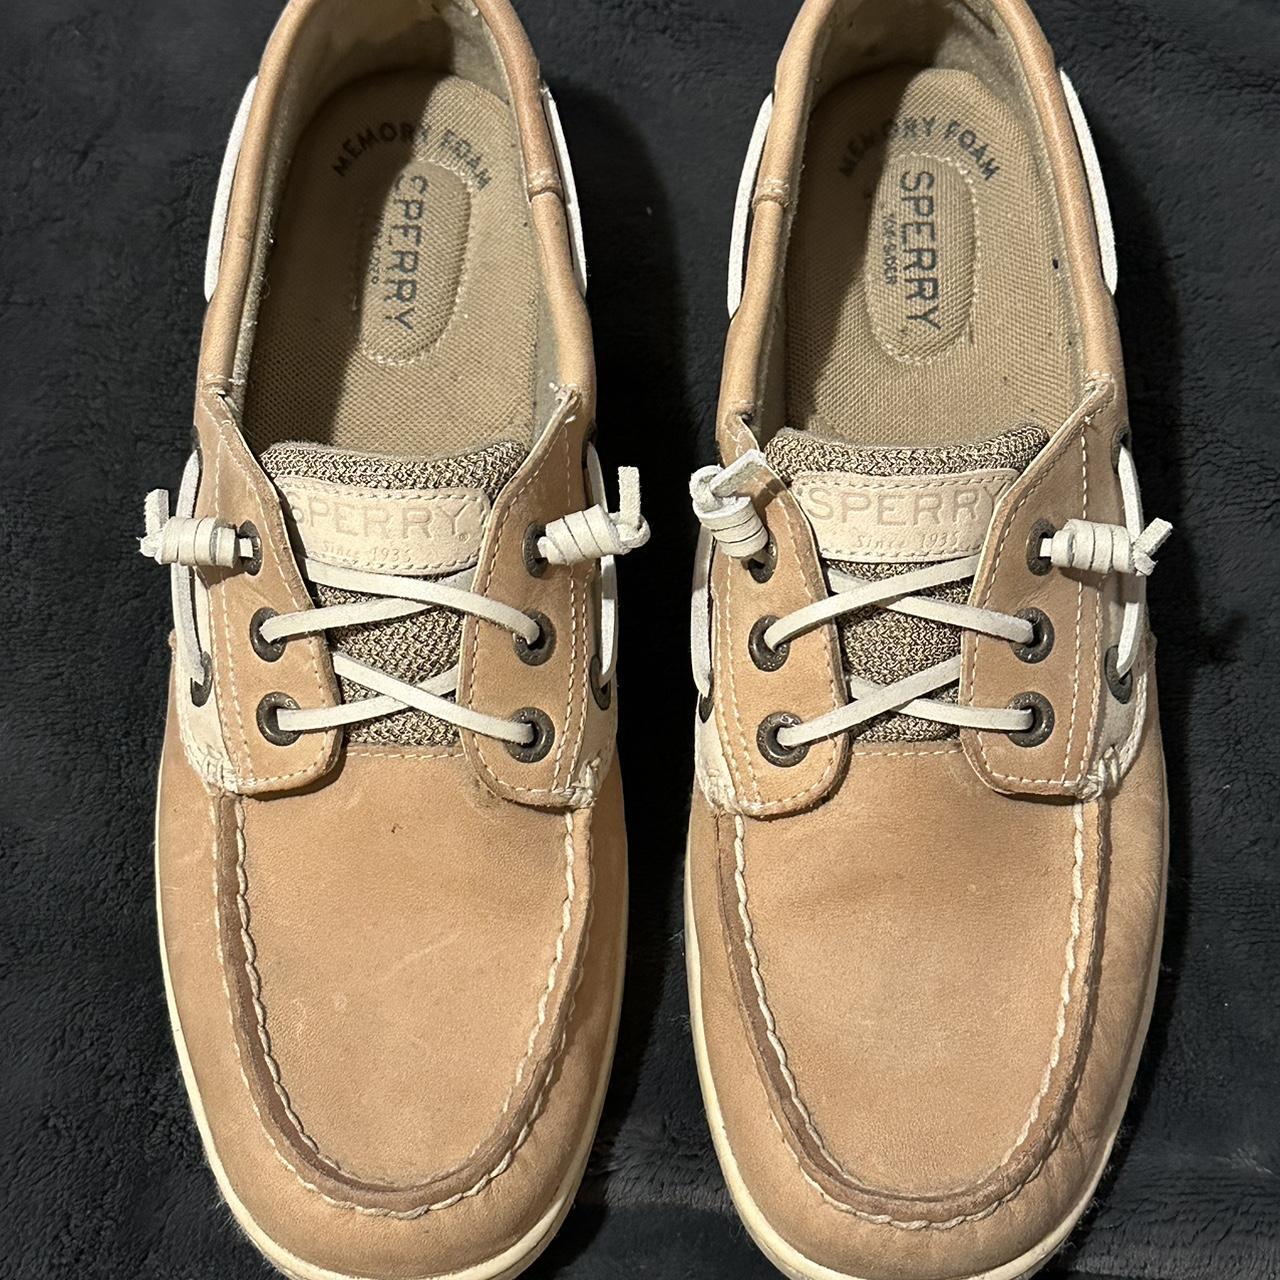 Sperry Women's Tan and Cream Boat-shoes (2)